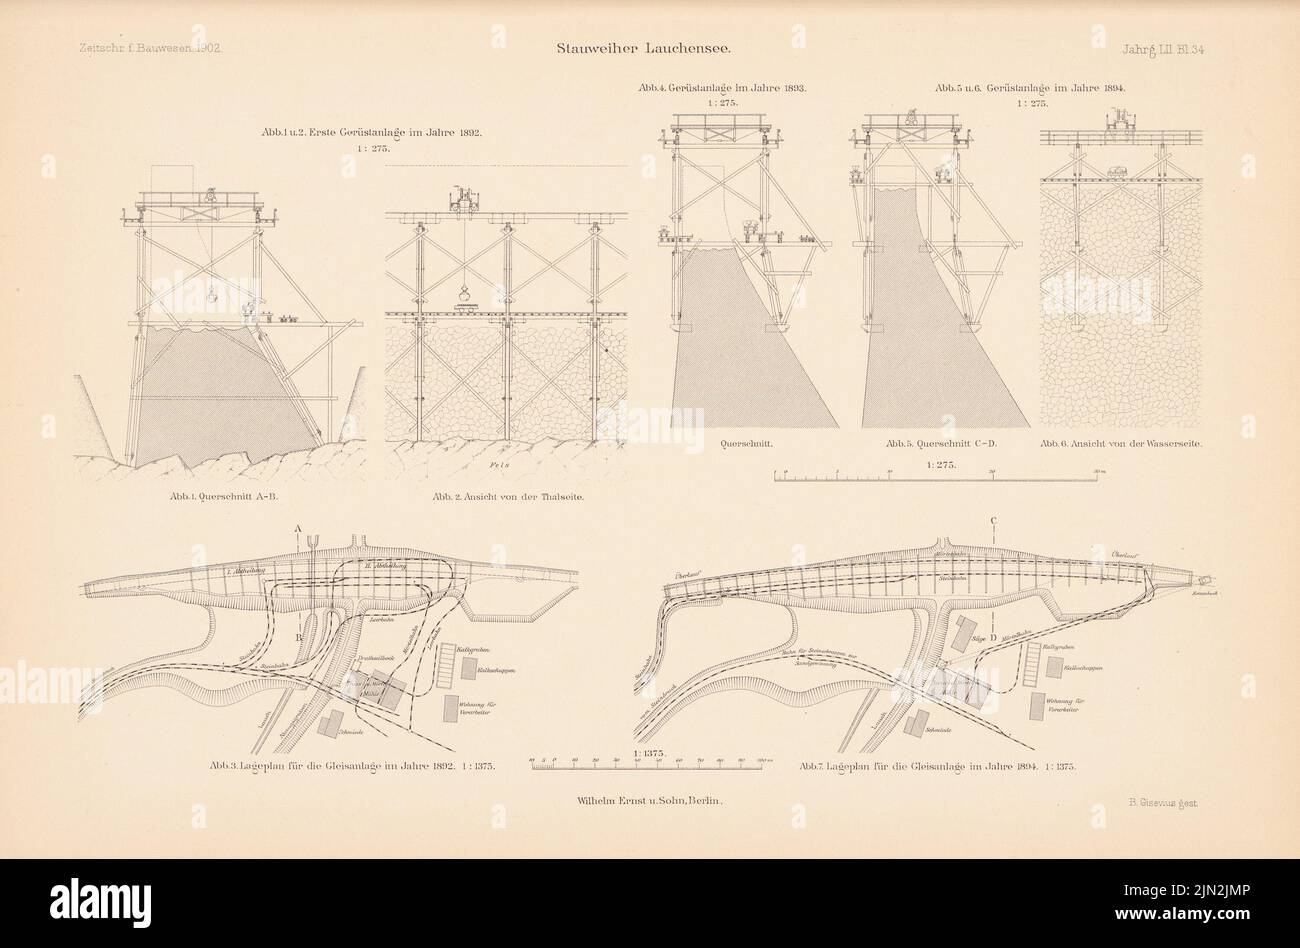 N.N., Stauweiler Lauchensee, Lautenbach. (From: Atlas to the magazine for Building, ed. V. Ministry of Public Work, Jg. 52, 1902): Plans for track systems 1: 1375, views, cuts of the scaffolding systems 1: 275. Stitch on paper, 29.5 x 44.7 cm (including scan edges) Stock Photo